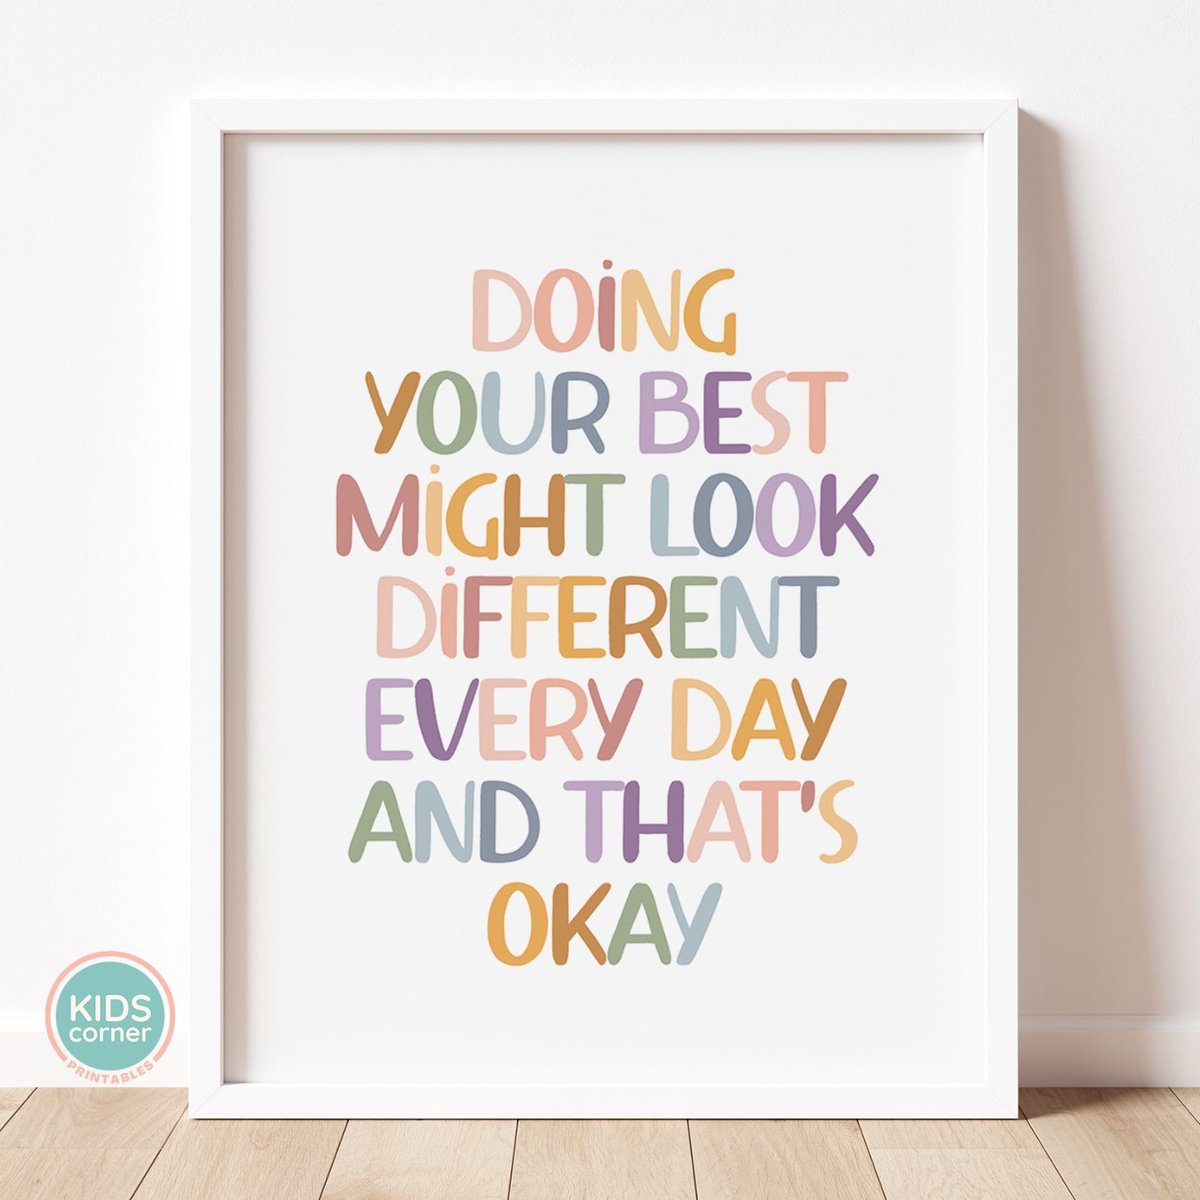 Doing your best might look different every day and that's okay! 
#doingyourbest #kidscorner #doingyourbesteveryday #kidscornerprintables #kids #kidsroomdecor #kidsdecor #kidspiration #playroom #playroomdecor #classroom #classroomprintables